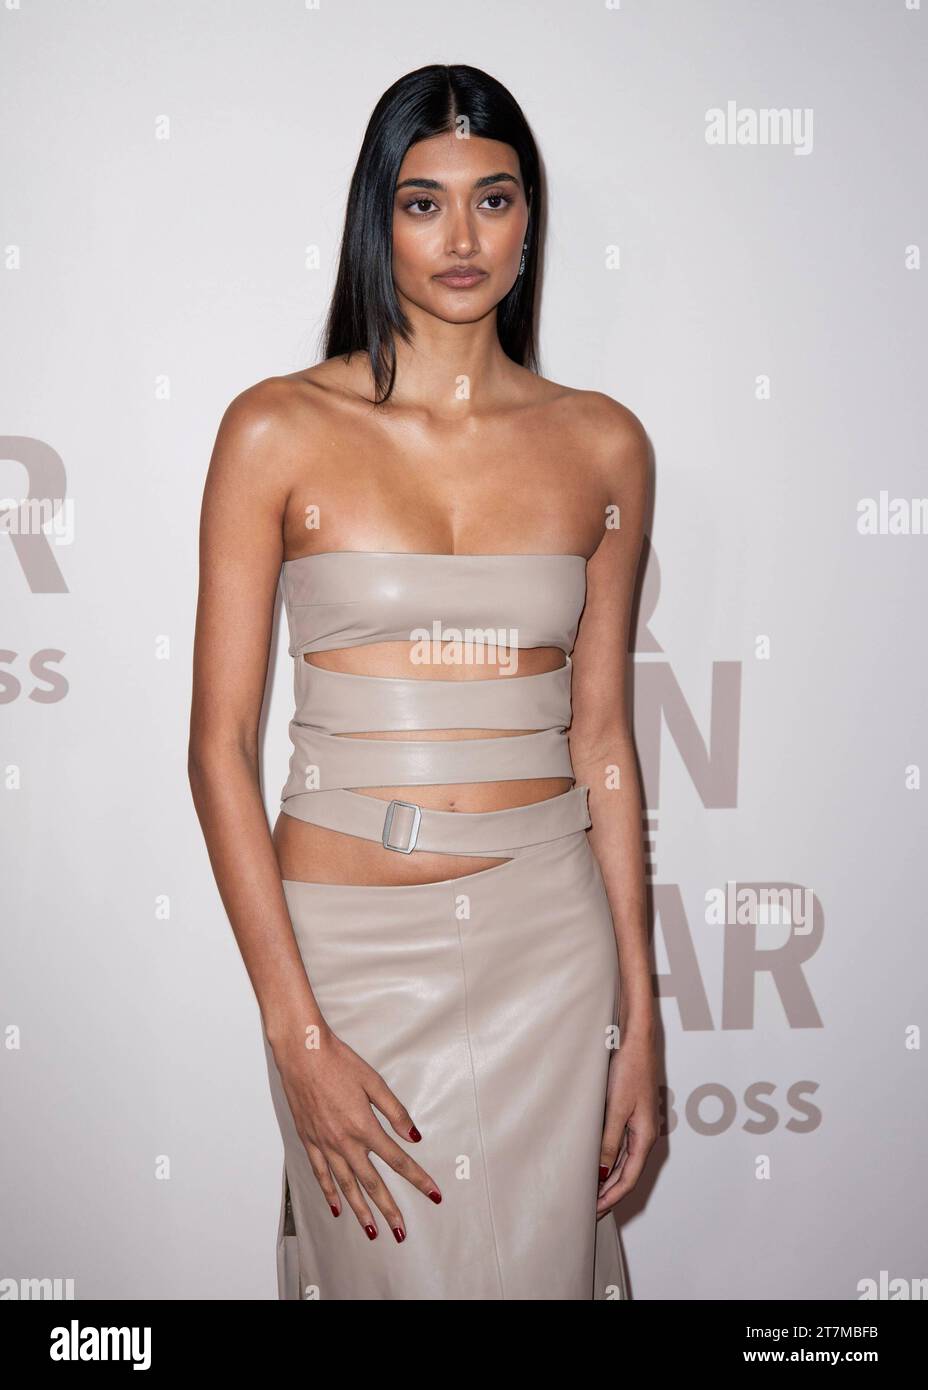 Neelam Gill frequenta il GQ Men of the Year in associazione con IL BOSS, alla Royal Opera House di Londra, in Inghilterra. REGNO UNITO. Mercoledì 15 novembre 2023 - BANG MEDIA INTERNATIONAL FAMOUS PICTURES 28 HOLMES ROAD LONDON NW5 3AB REGNO UNITO tel 44 0 02 7485 1005 email: picturesfamous.uk.com Copyright: XJamesxWarrenx GQ Men of the Year 131 Credit: Imago/Alamy Live News Foto Stock